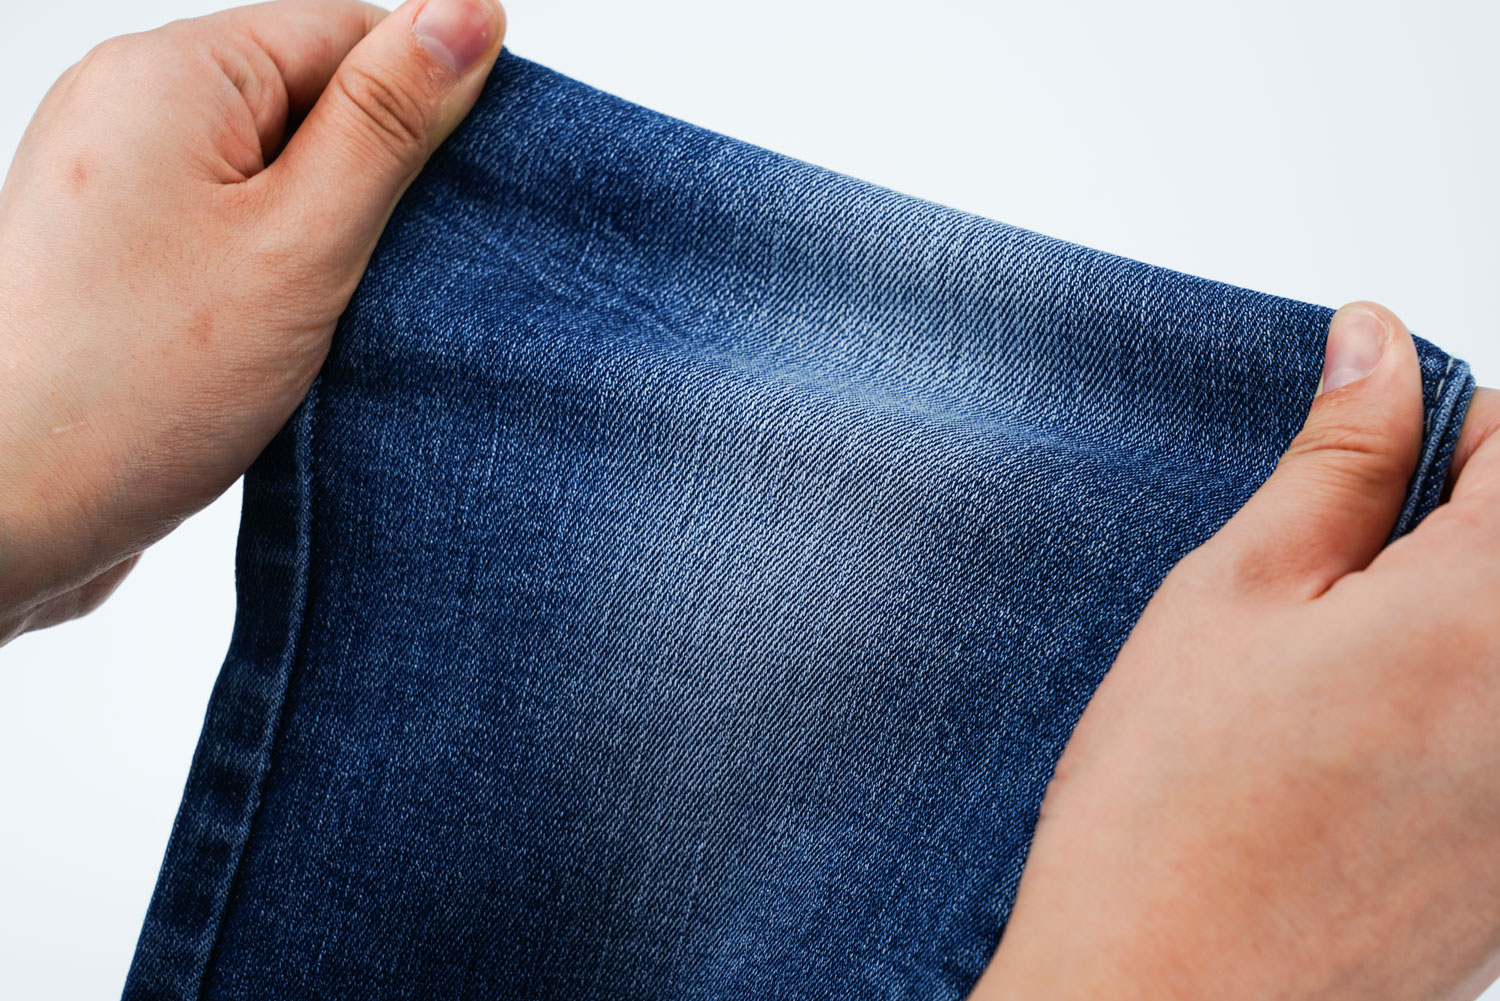 How to I Wash My Denim Jeans? 2